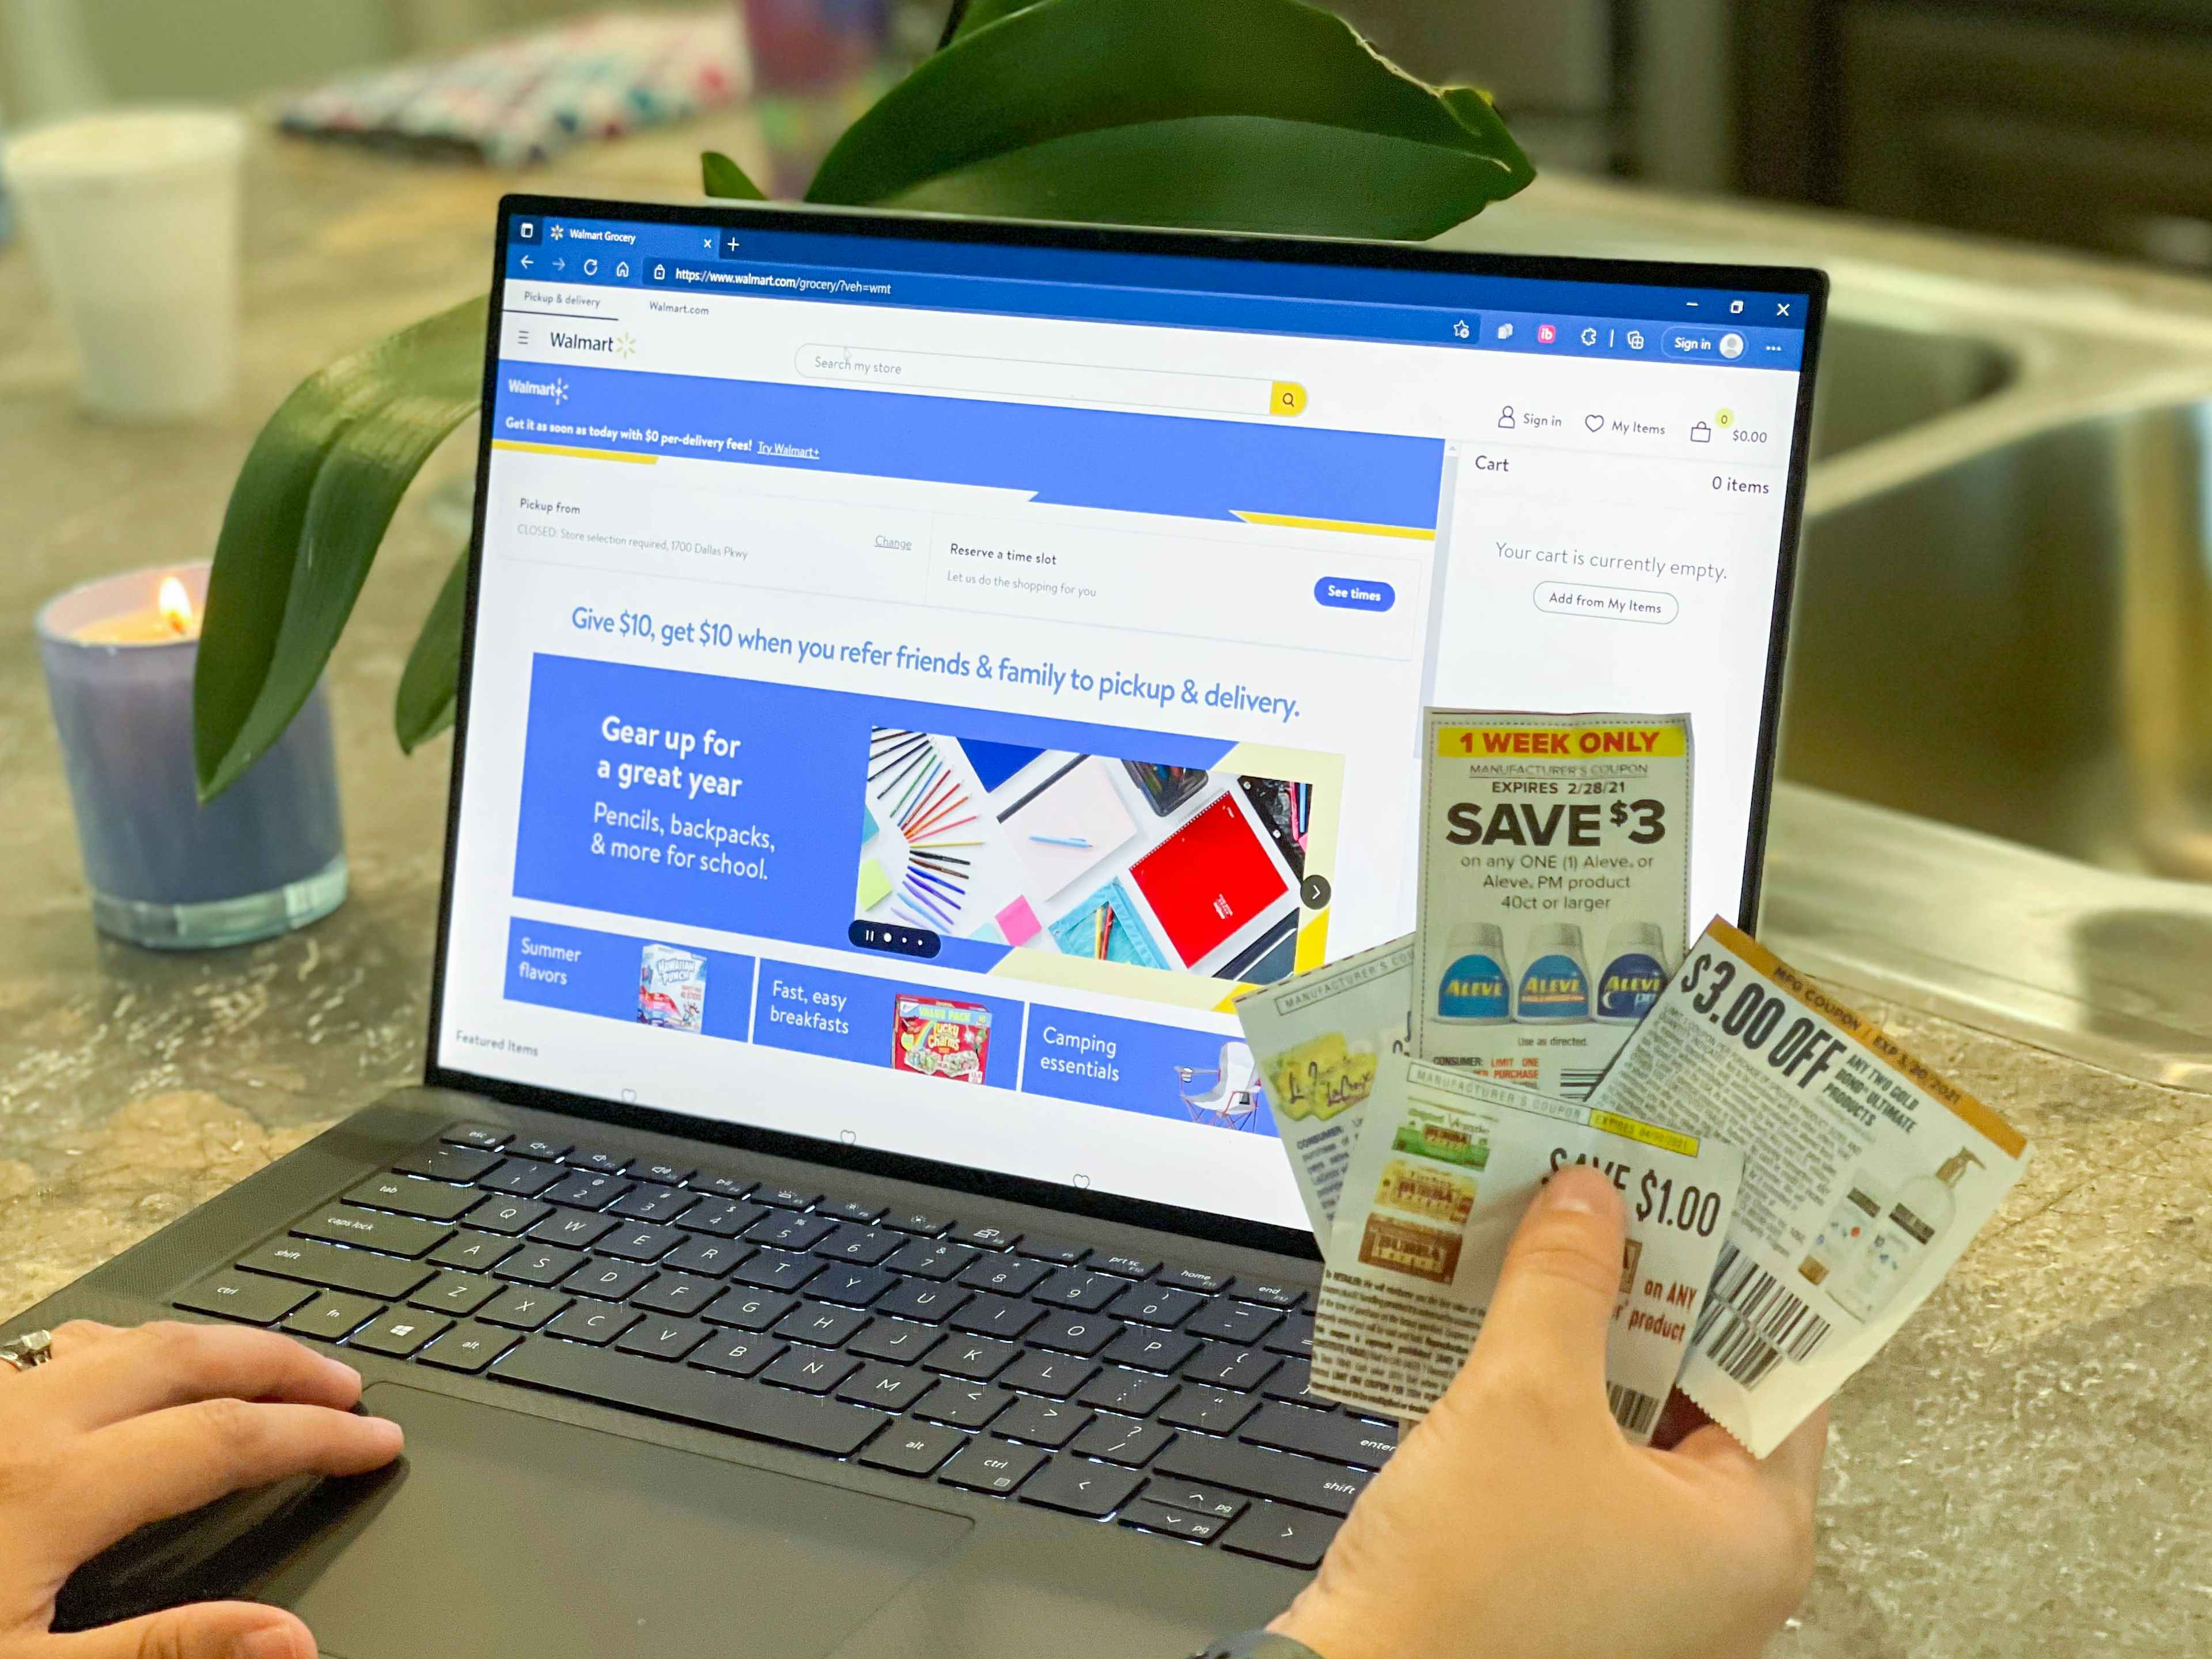 walmart.com online on laptop with coupons being held in front of it.